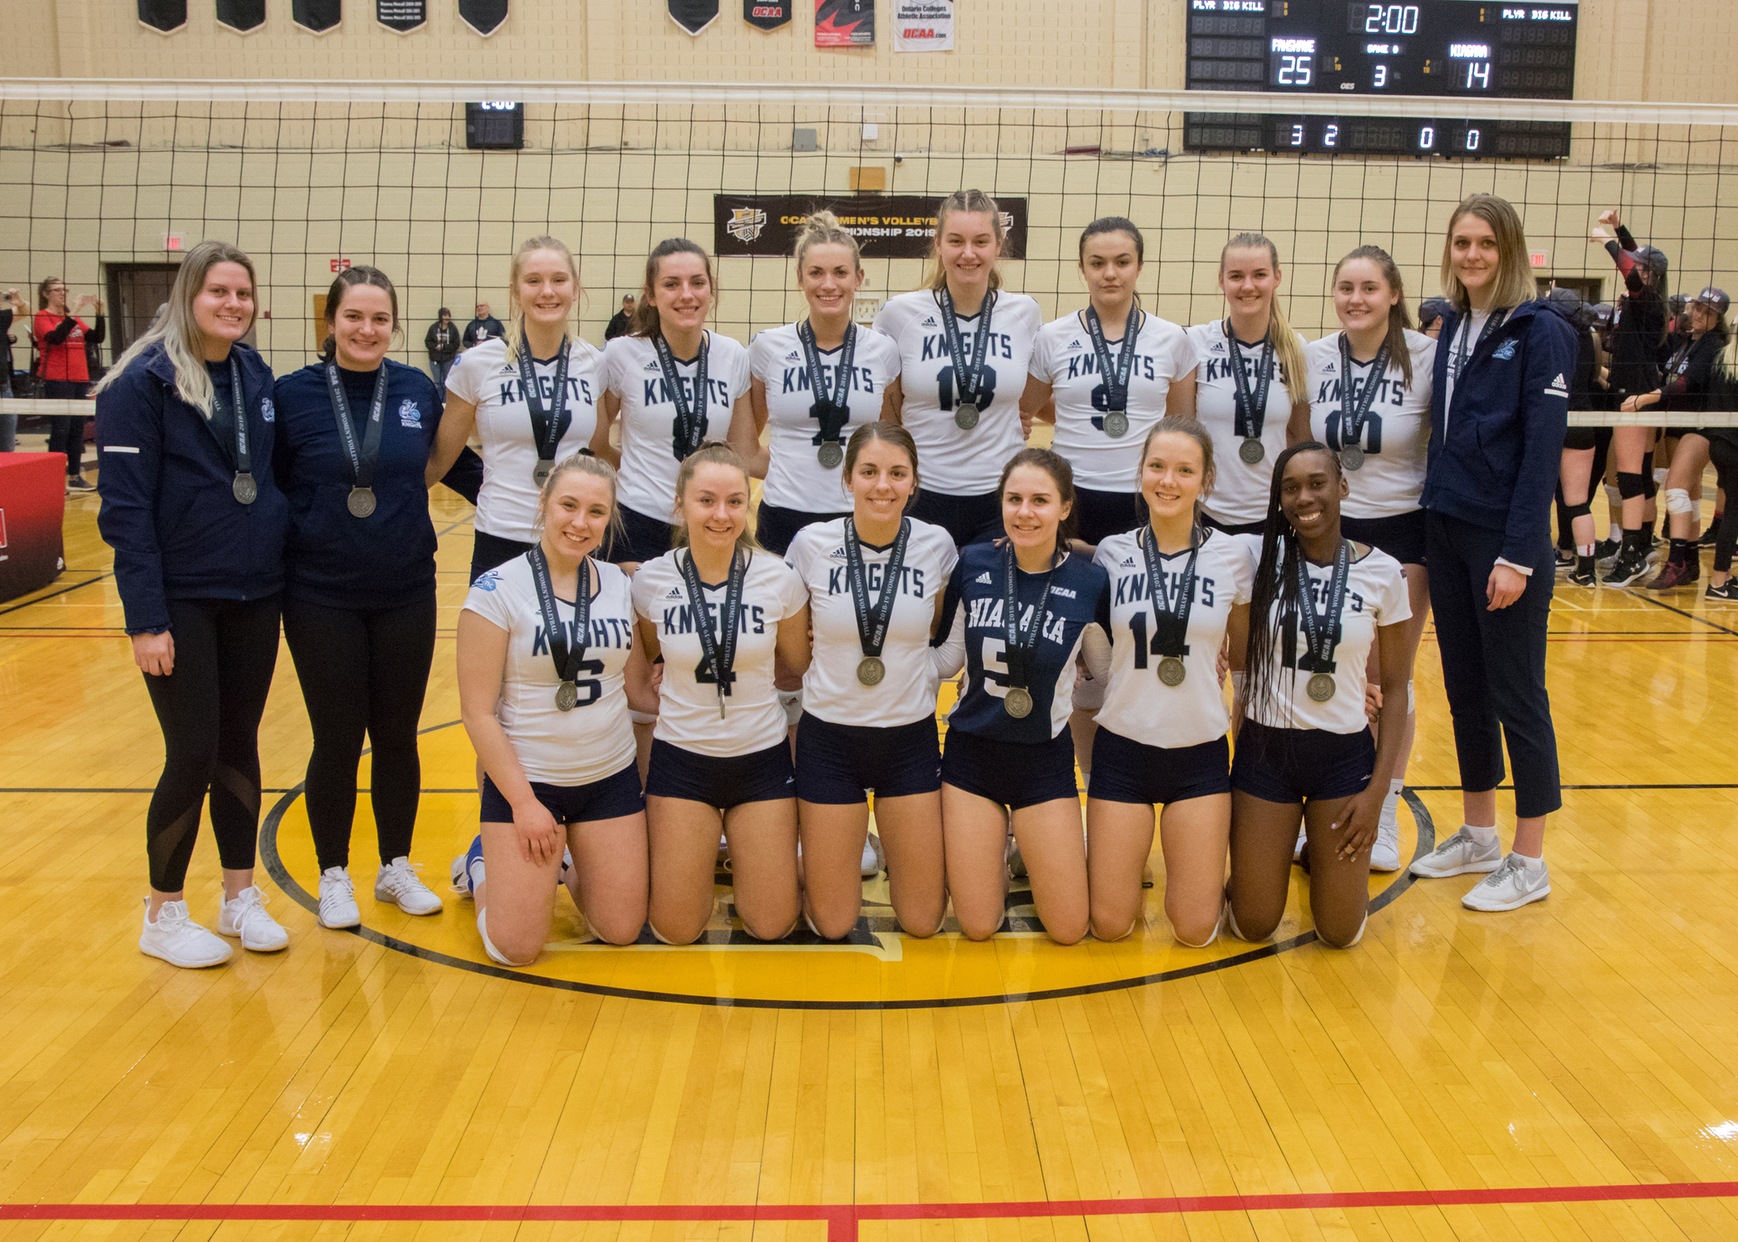 Spaling Steps Away from Women’s Volleyball Program